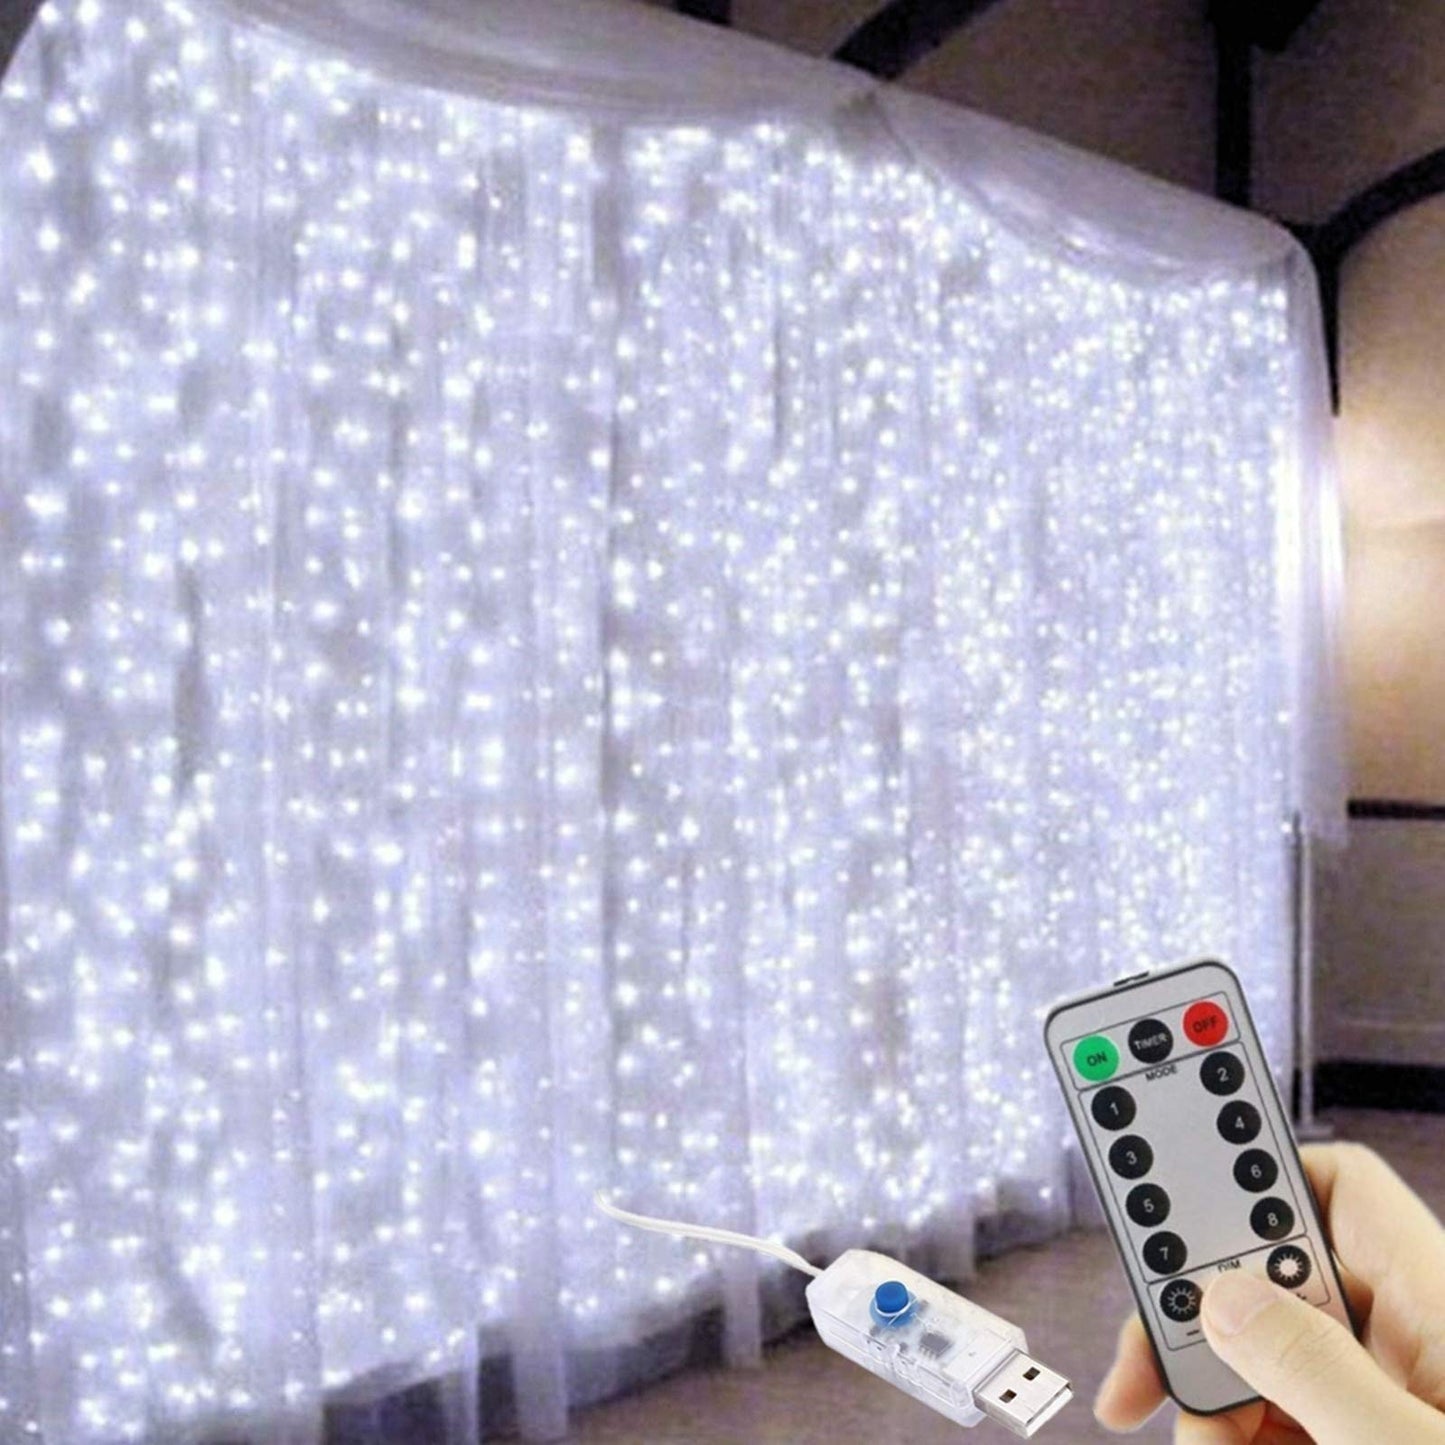 FANSIR 300 LED Curtain Lights, USB Window Lights, 3m x 3m 8 Modes Remote Control Fairy Light Waterproof LED Copper String Lights for Outdoor Indoor Wedding Party Garden Bedroom Decoration, Cool White